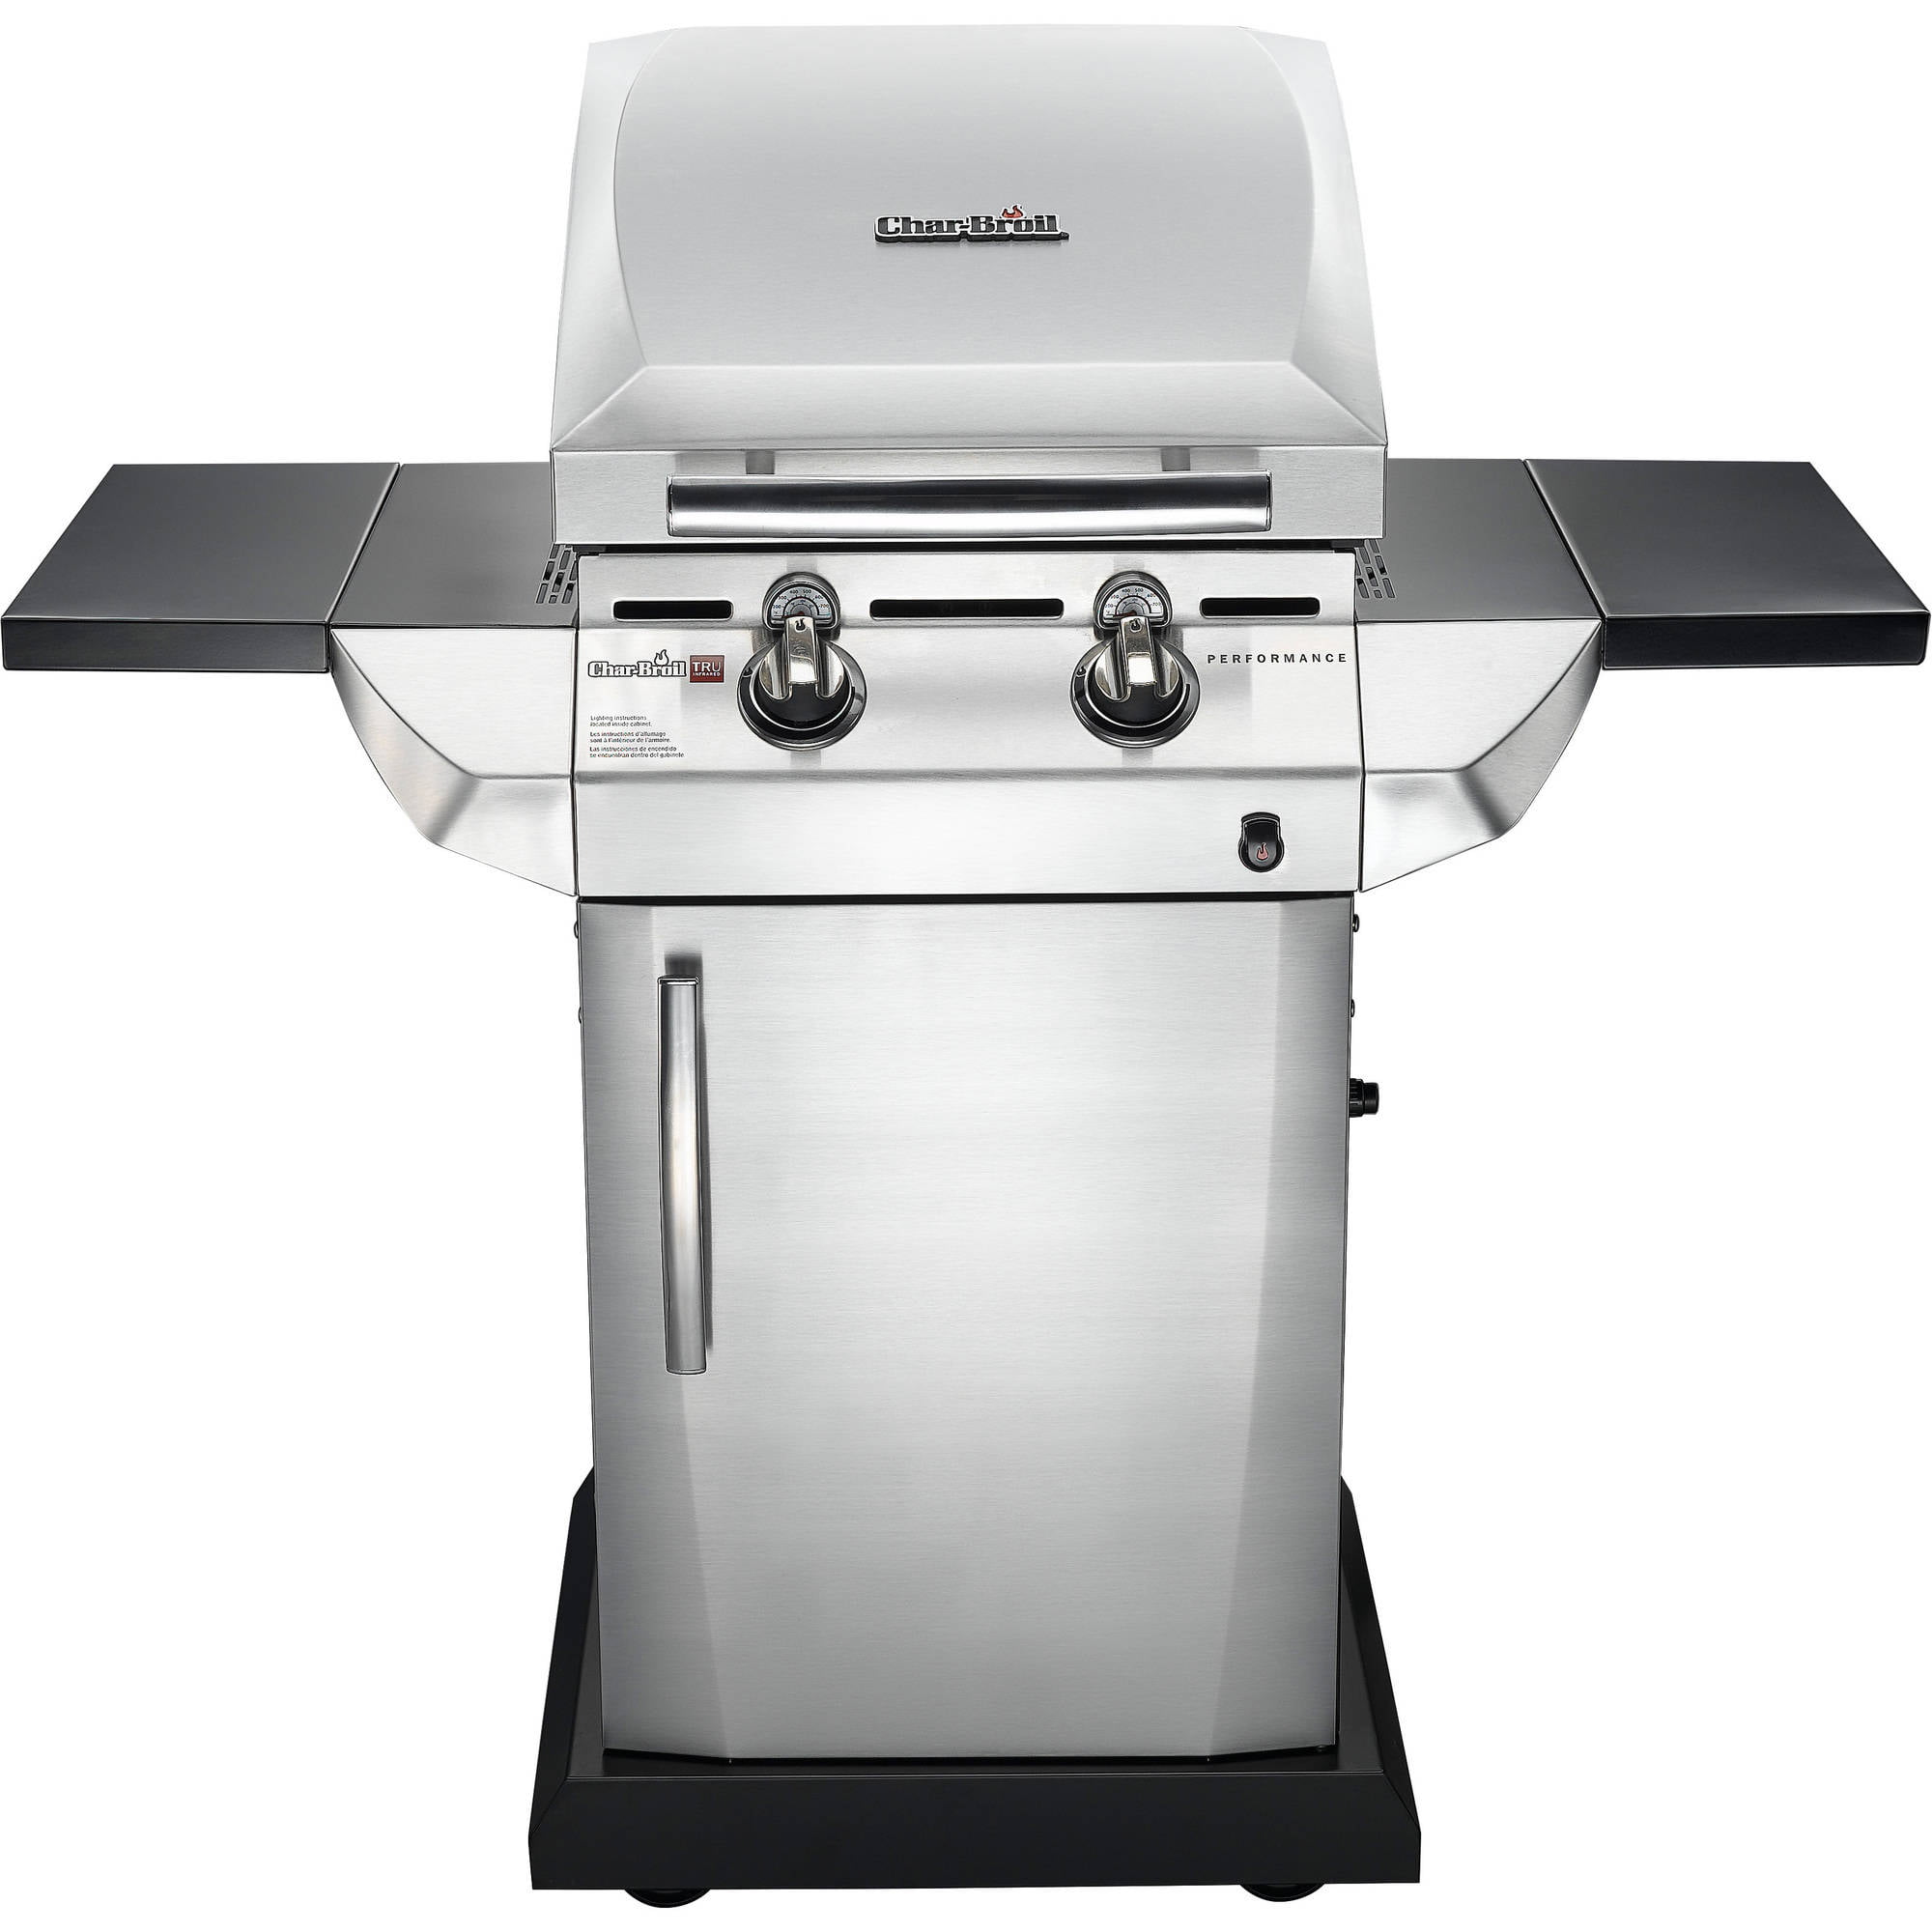 How does an infrared gas grill work?